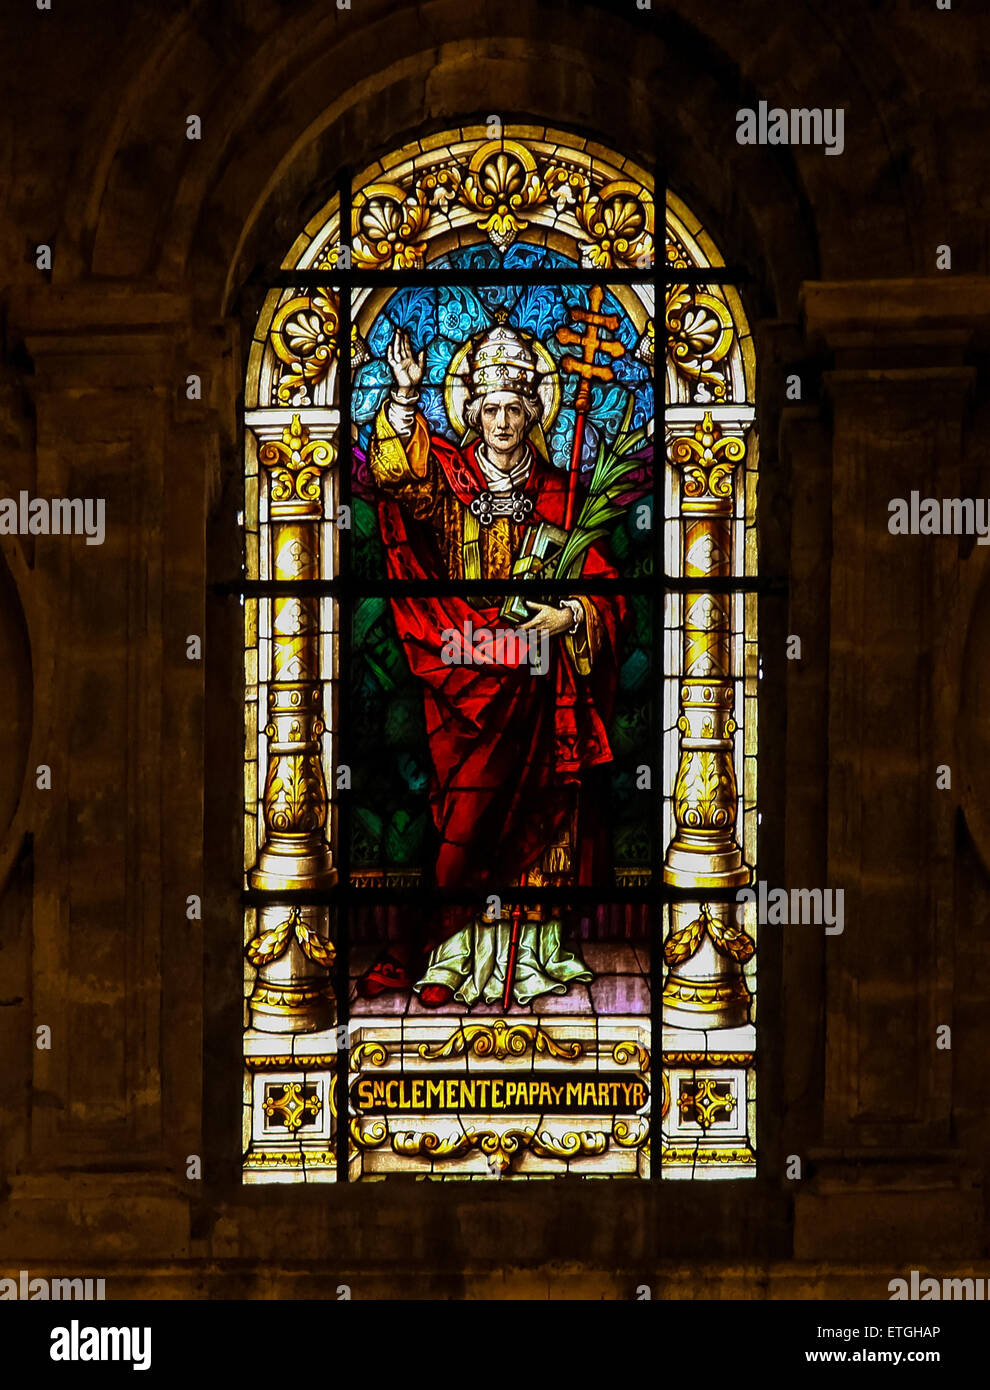 Stained glass window depicting Pope Clement I, bishop of Rome from 92 to 99, martyr and patron saint of mariners Stock Photo